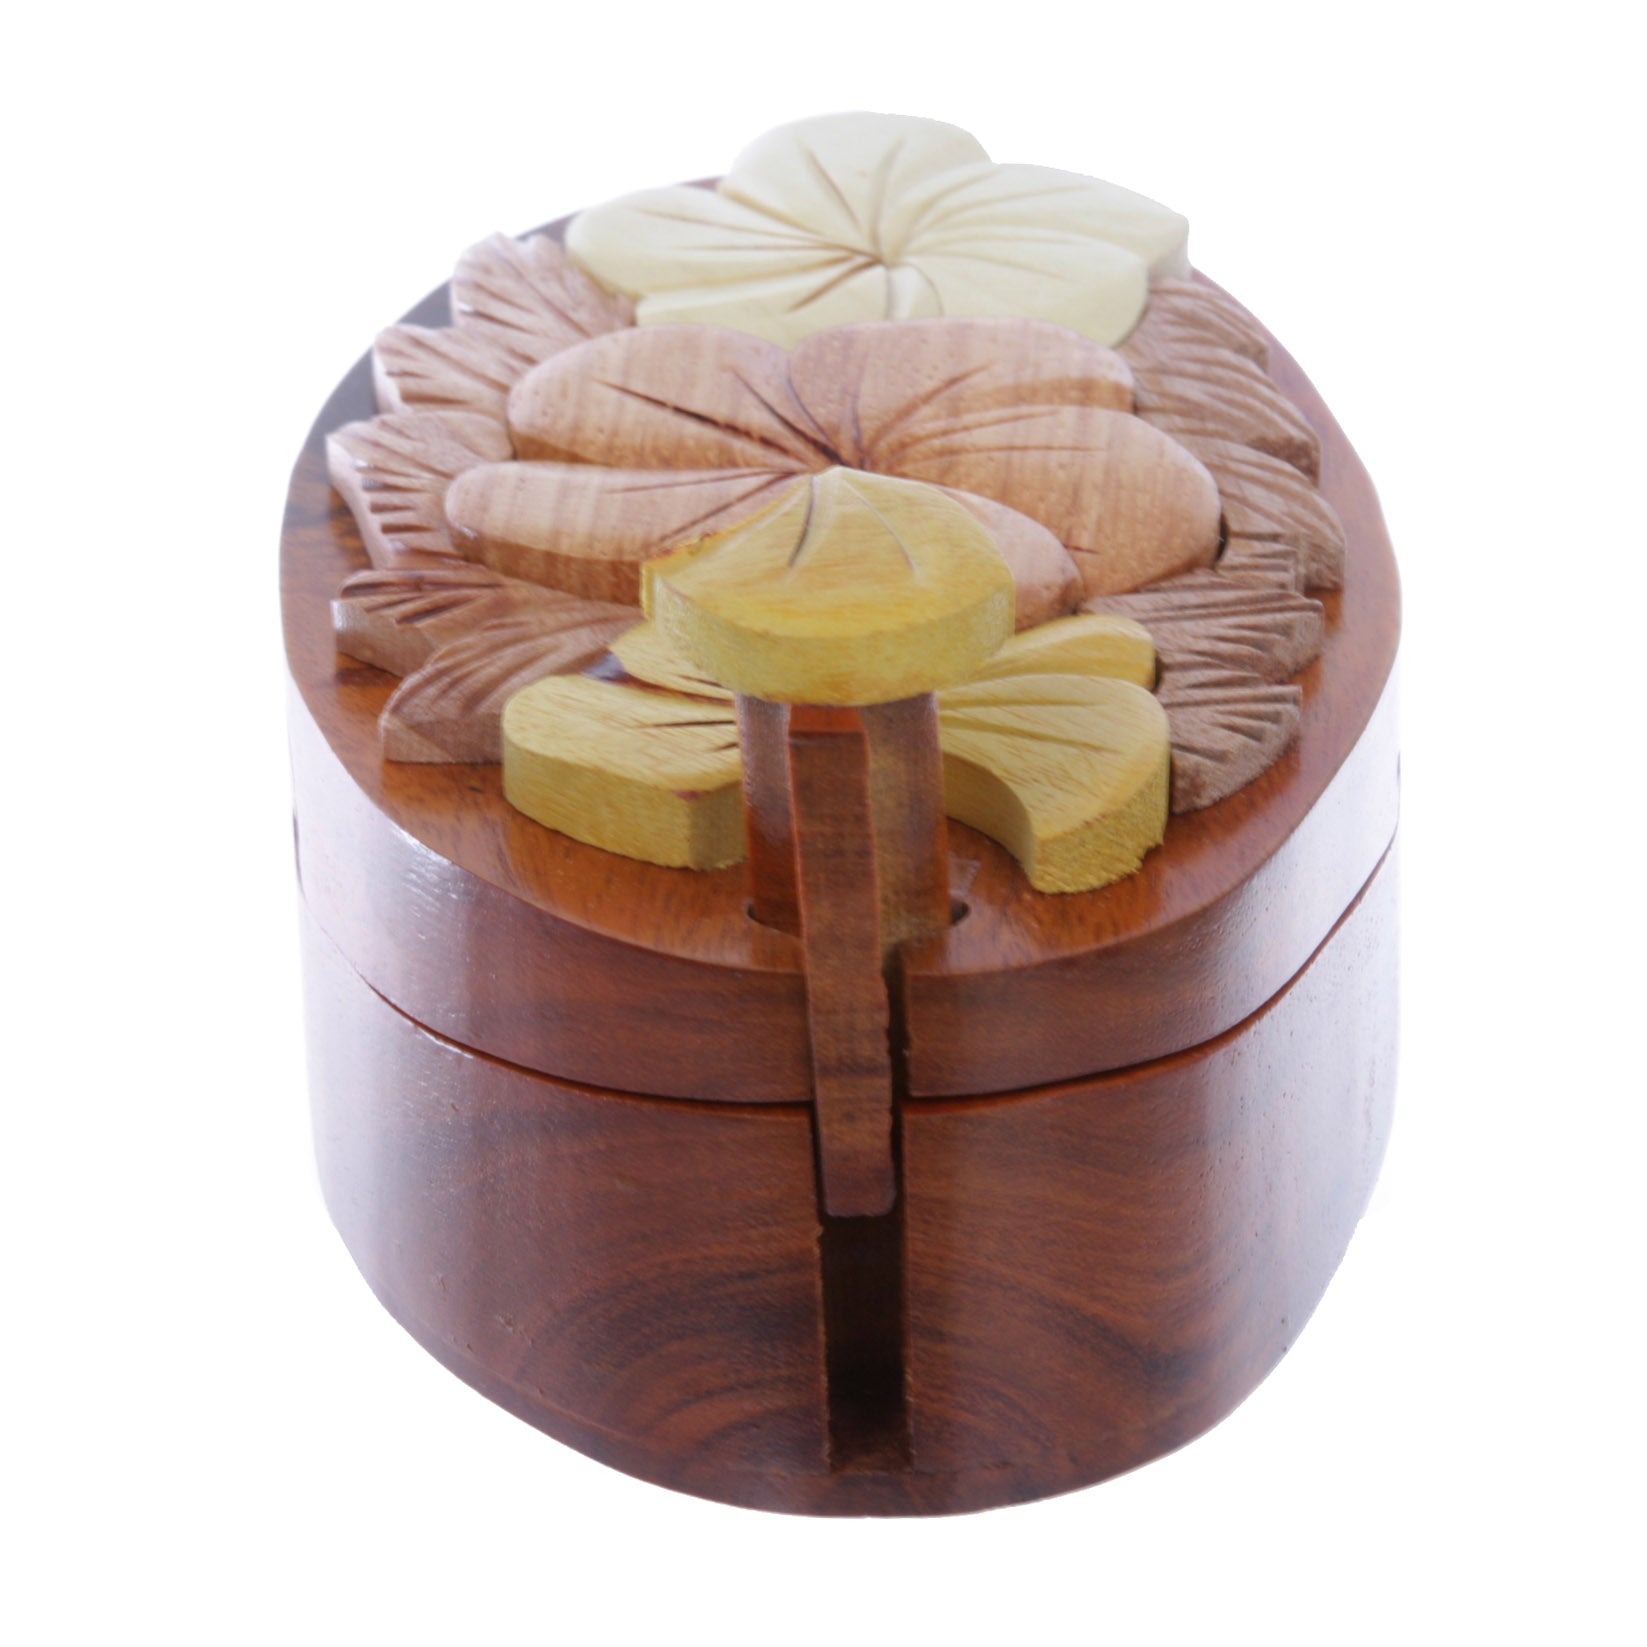 Handcrafted Wooden Flowers Shape Oval Secret Jewelry Puzzle Box - Flowers